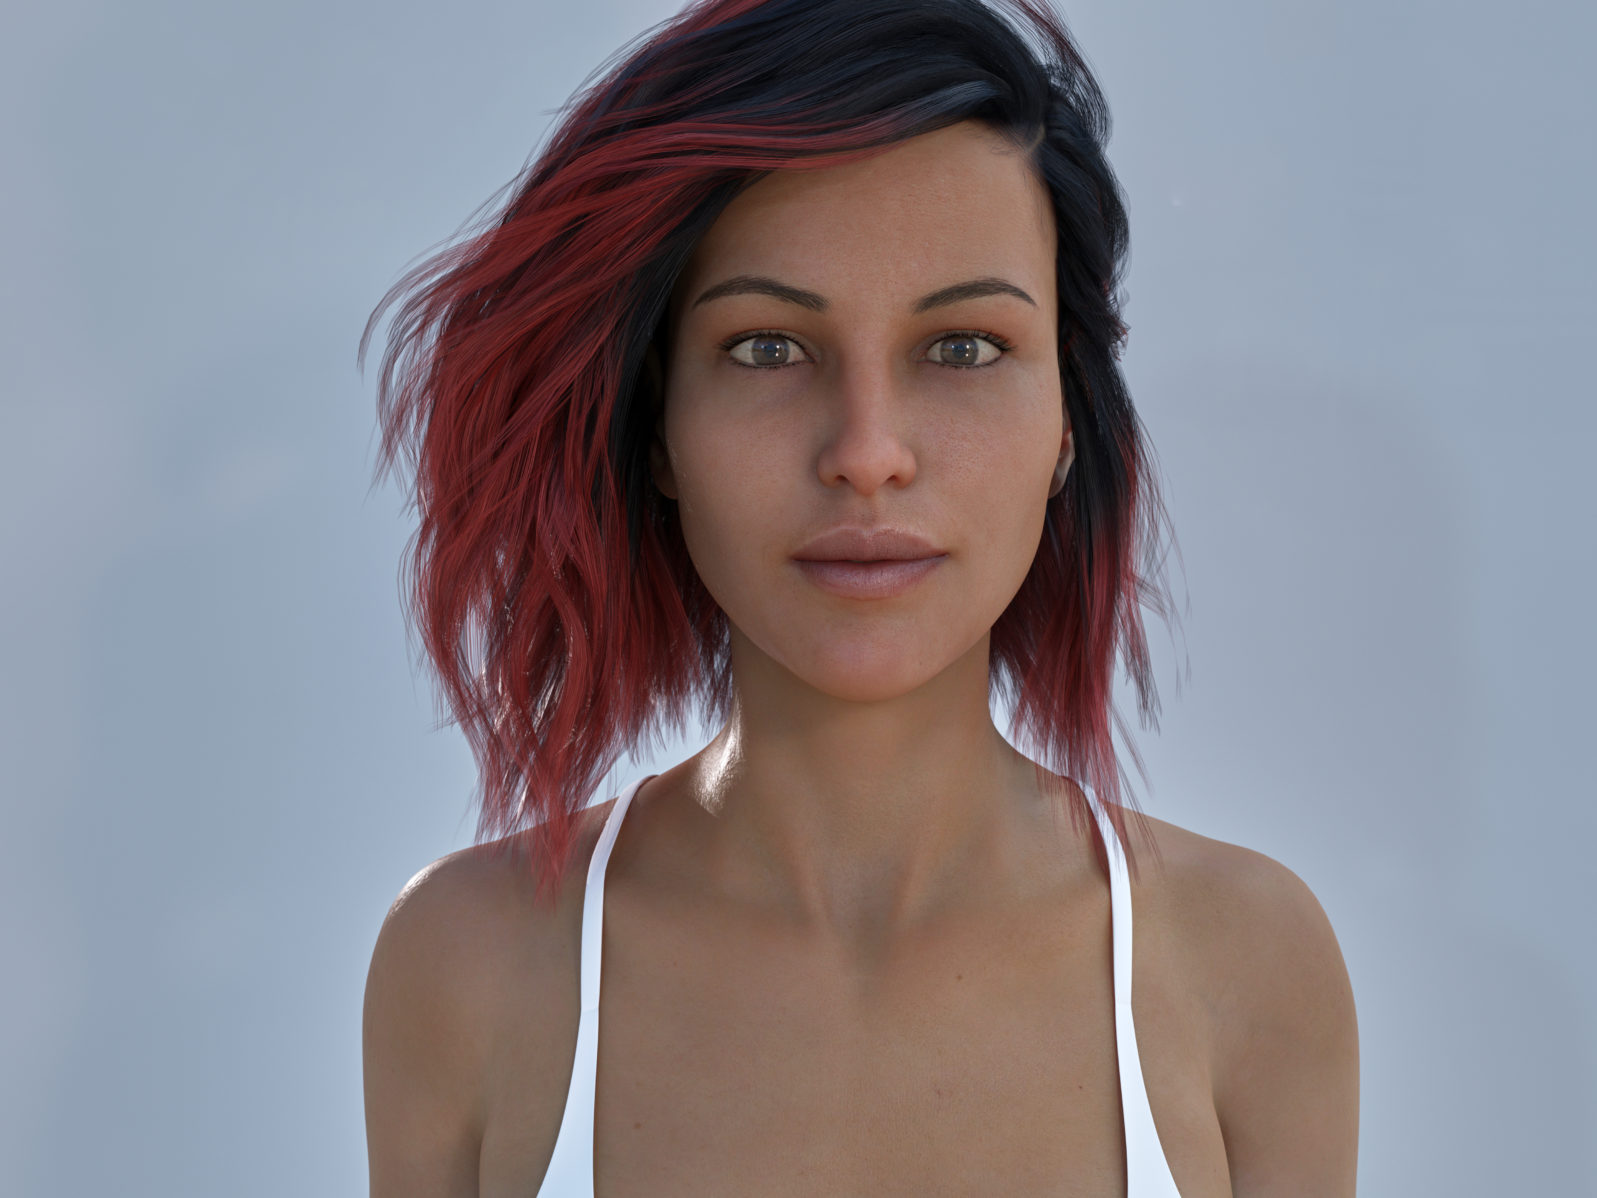 3D render beautiful woman computer generated photo realistic to to illustrate the uncanny valley effect